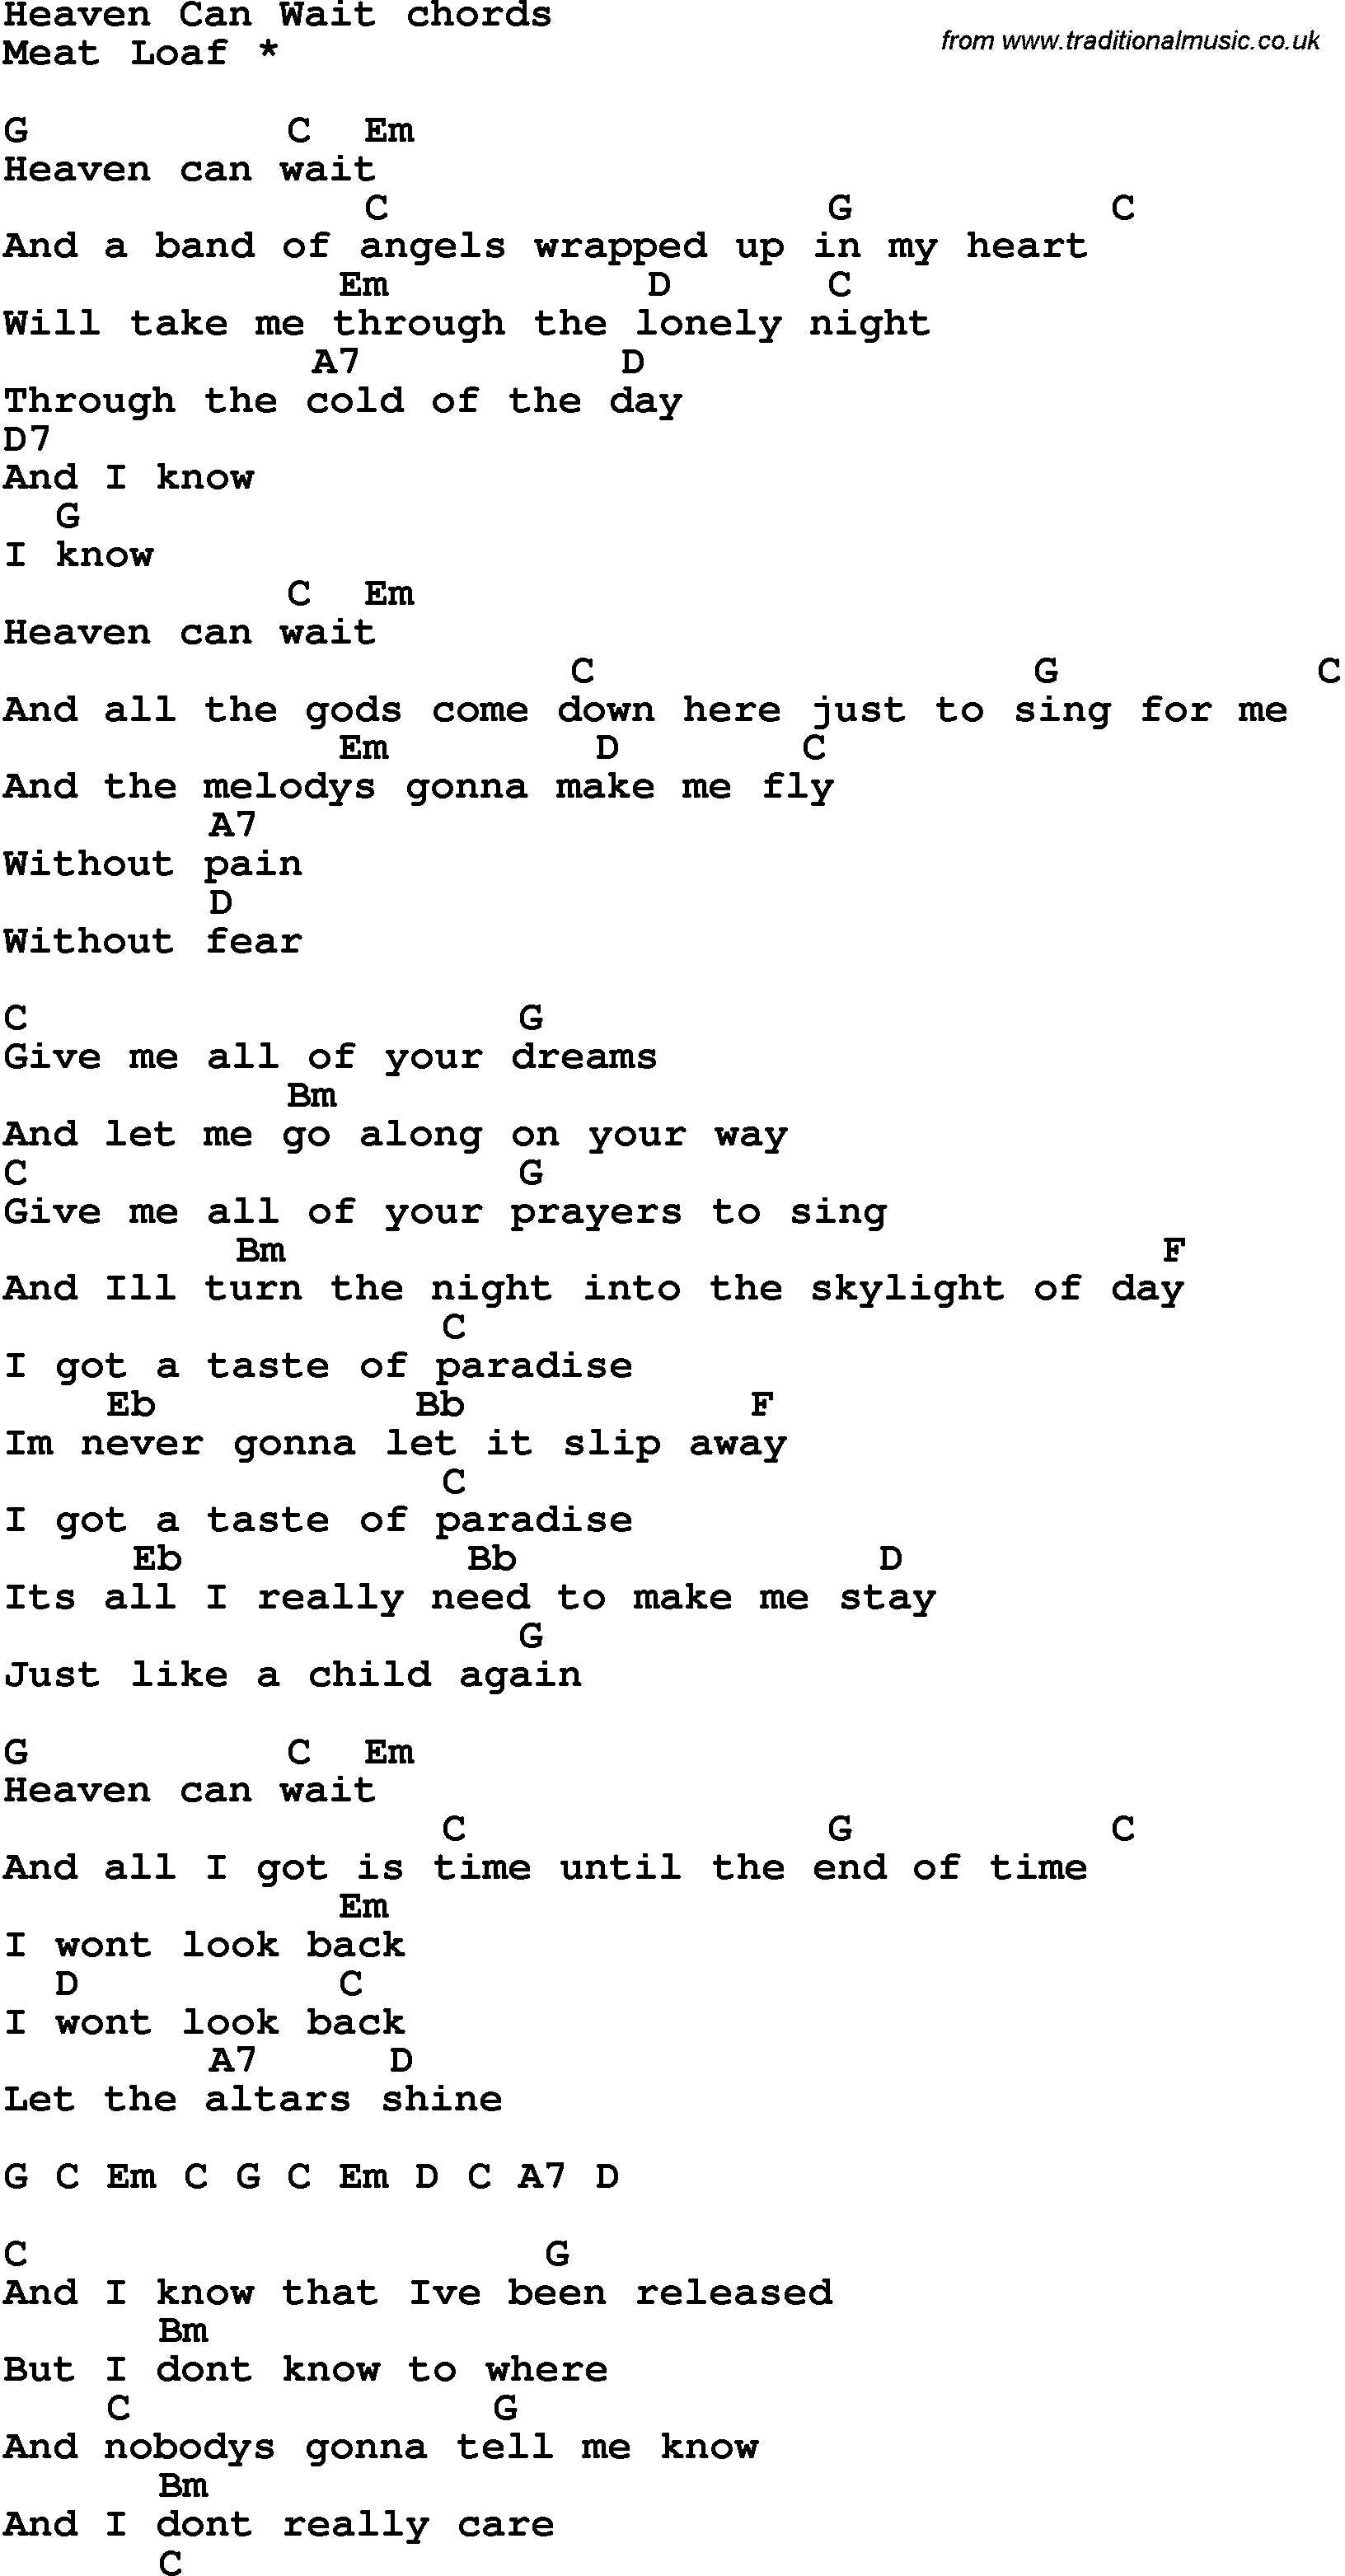 Song Lyrics with guitar chords for Heaven Can Wait